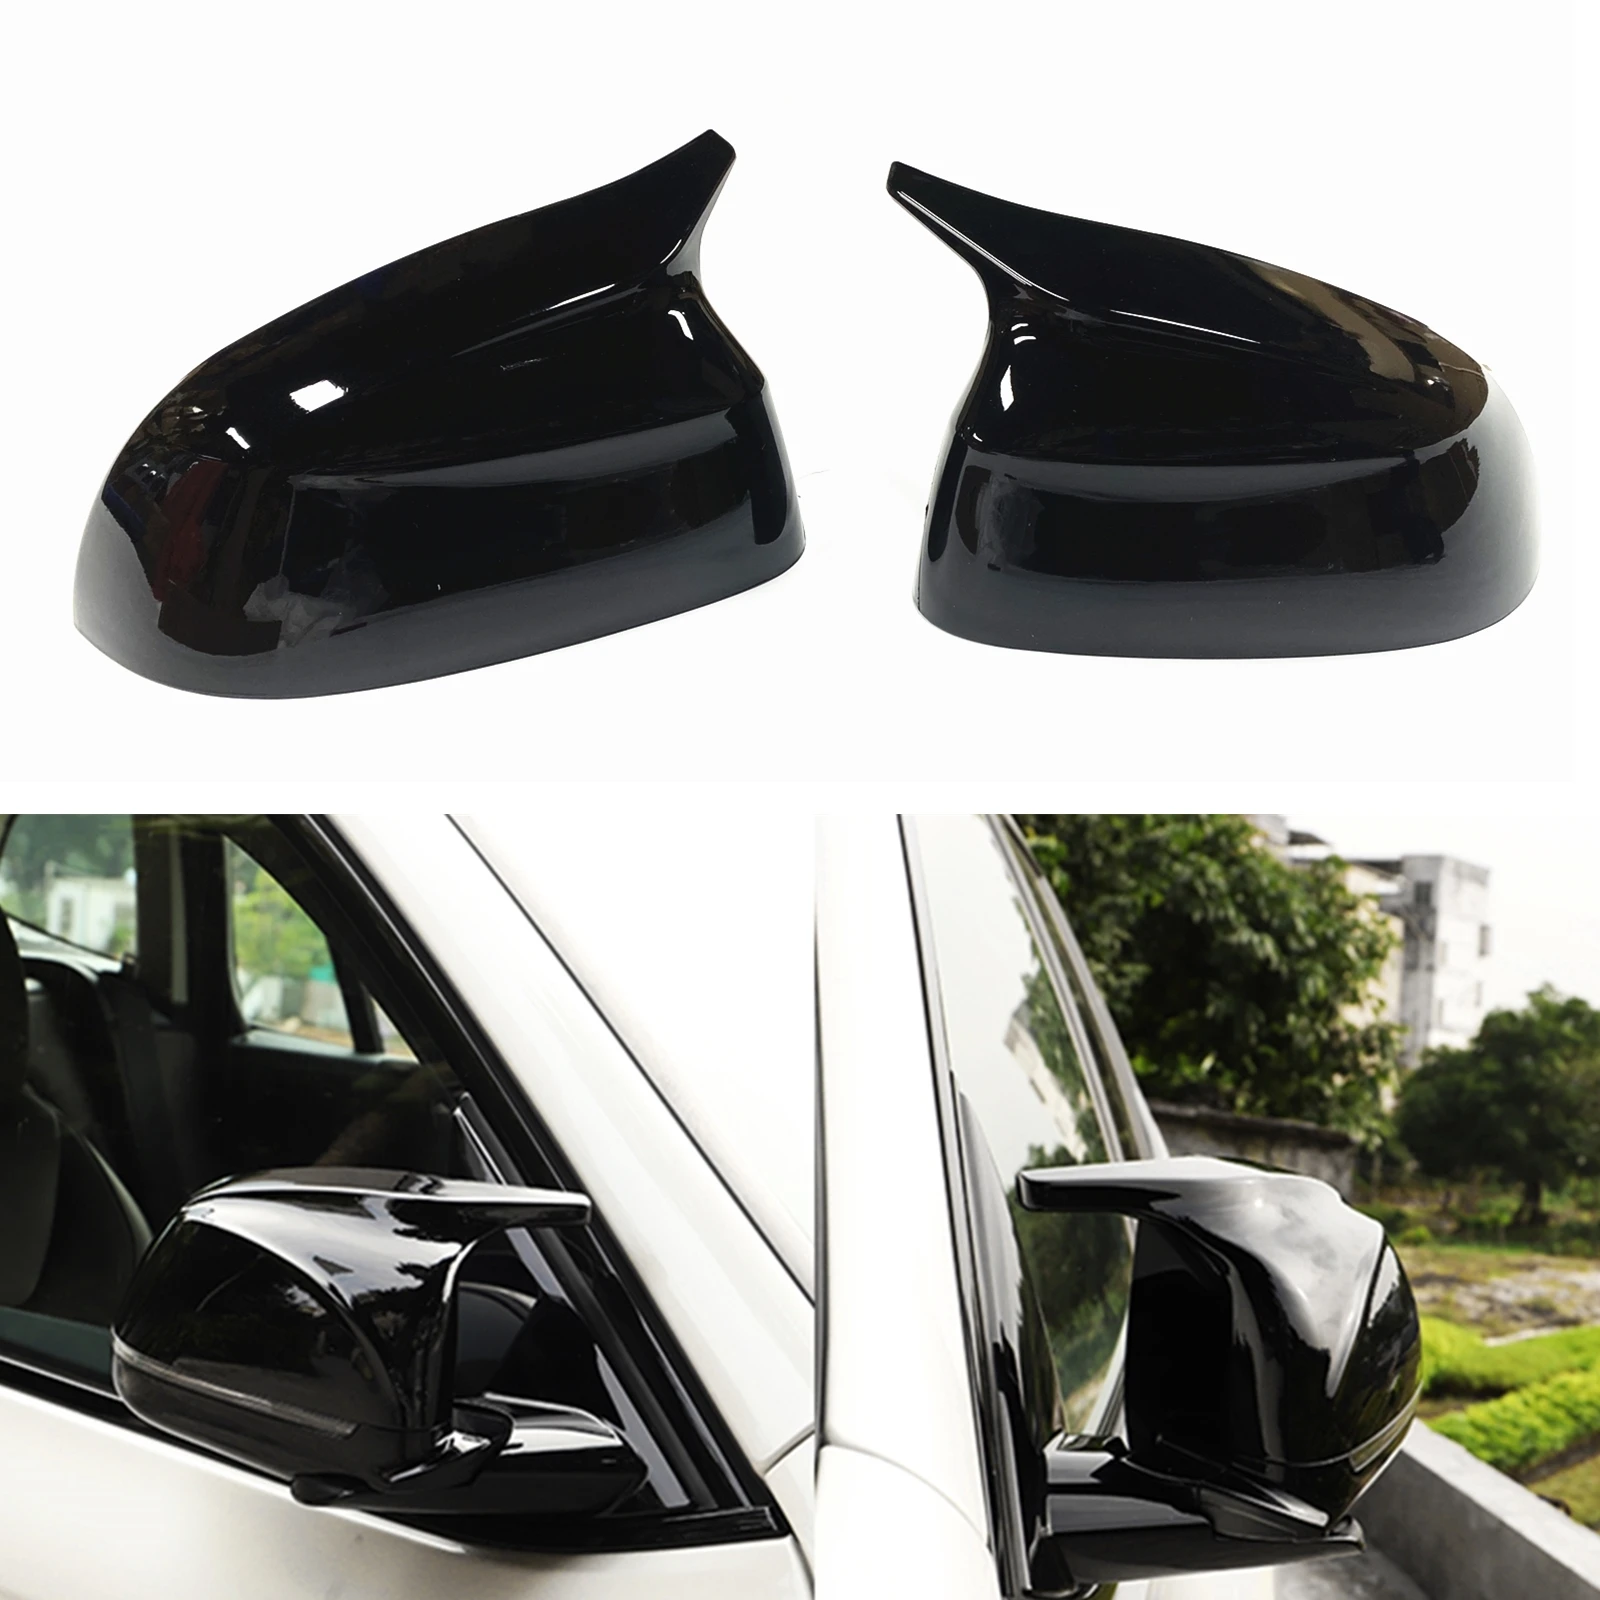 

Glossy Black Mirror Cover Add On For BMW X3 X4 X5 X6 X7 G01 G02 G03 G05 G06 2018-2021 Exterior Rear View Case Rearview Cap Shell